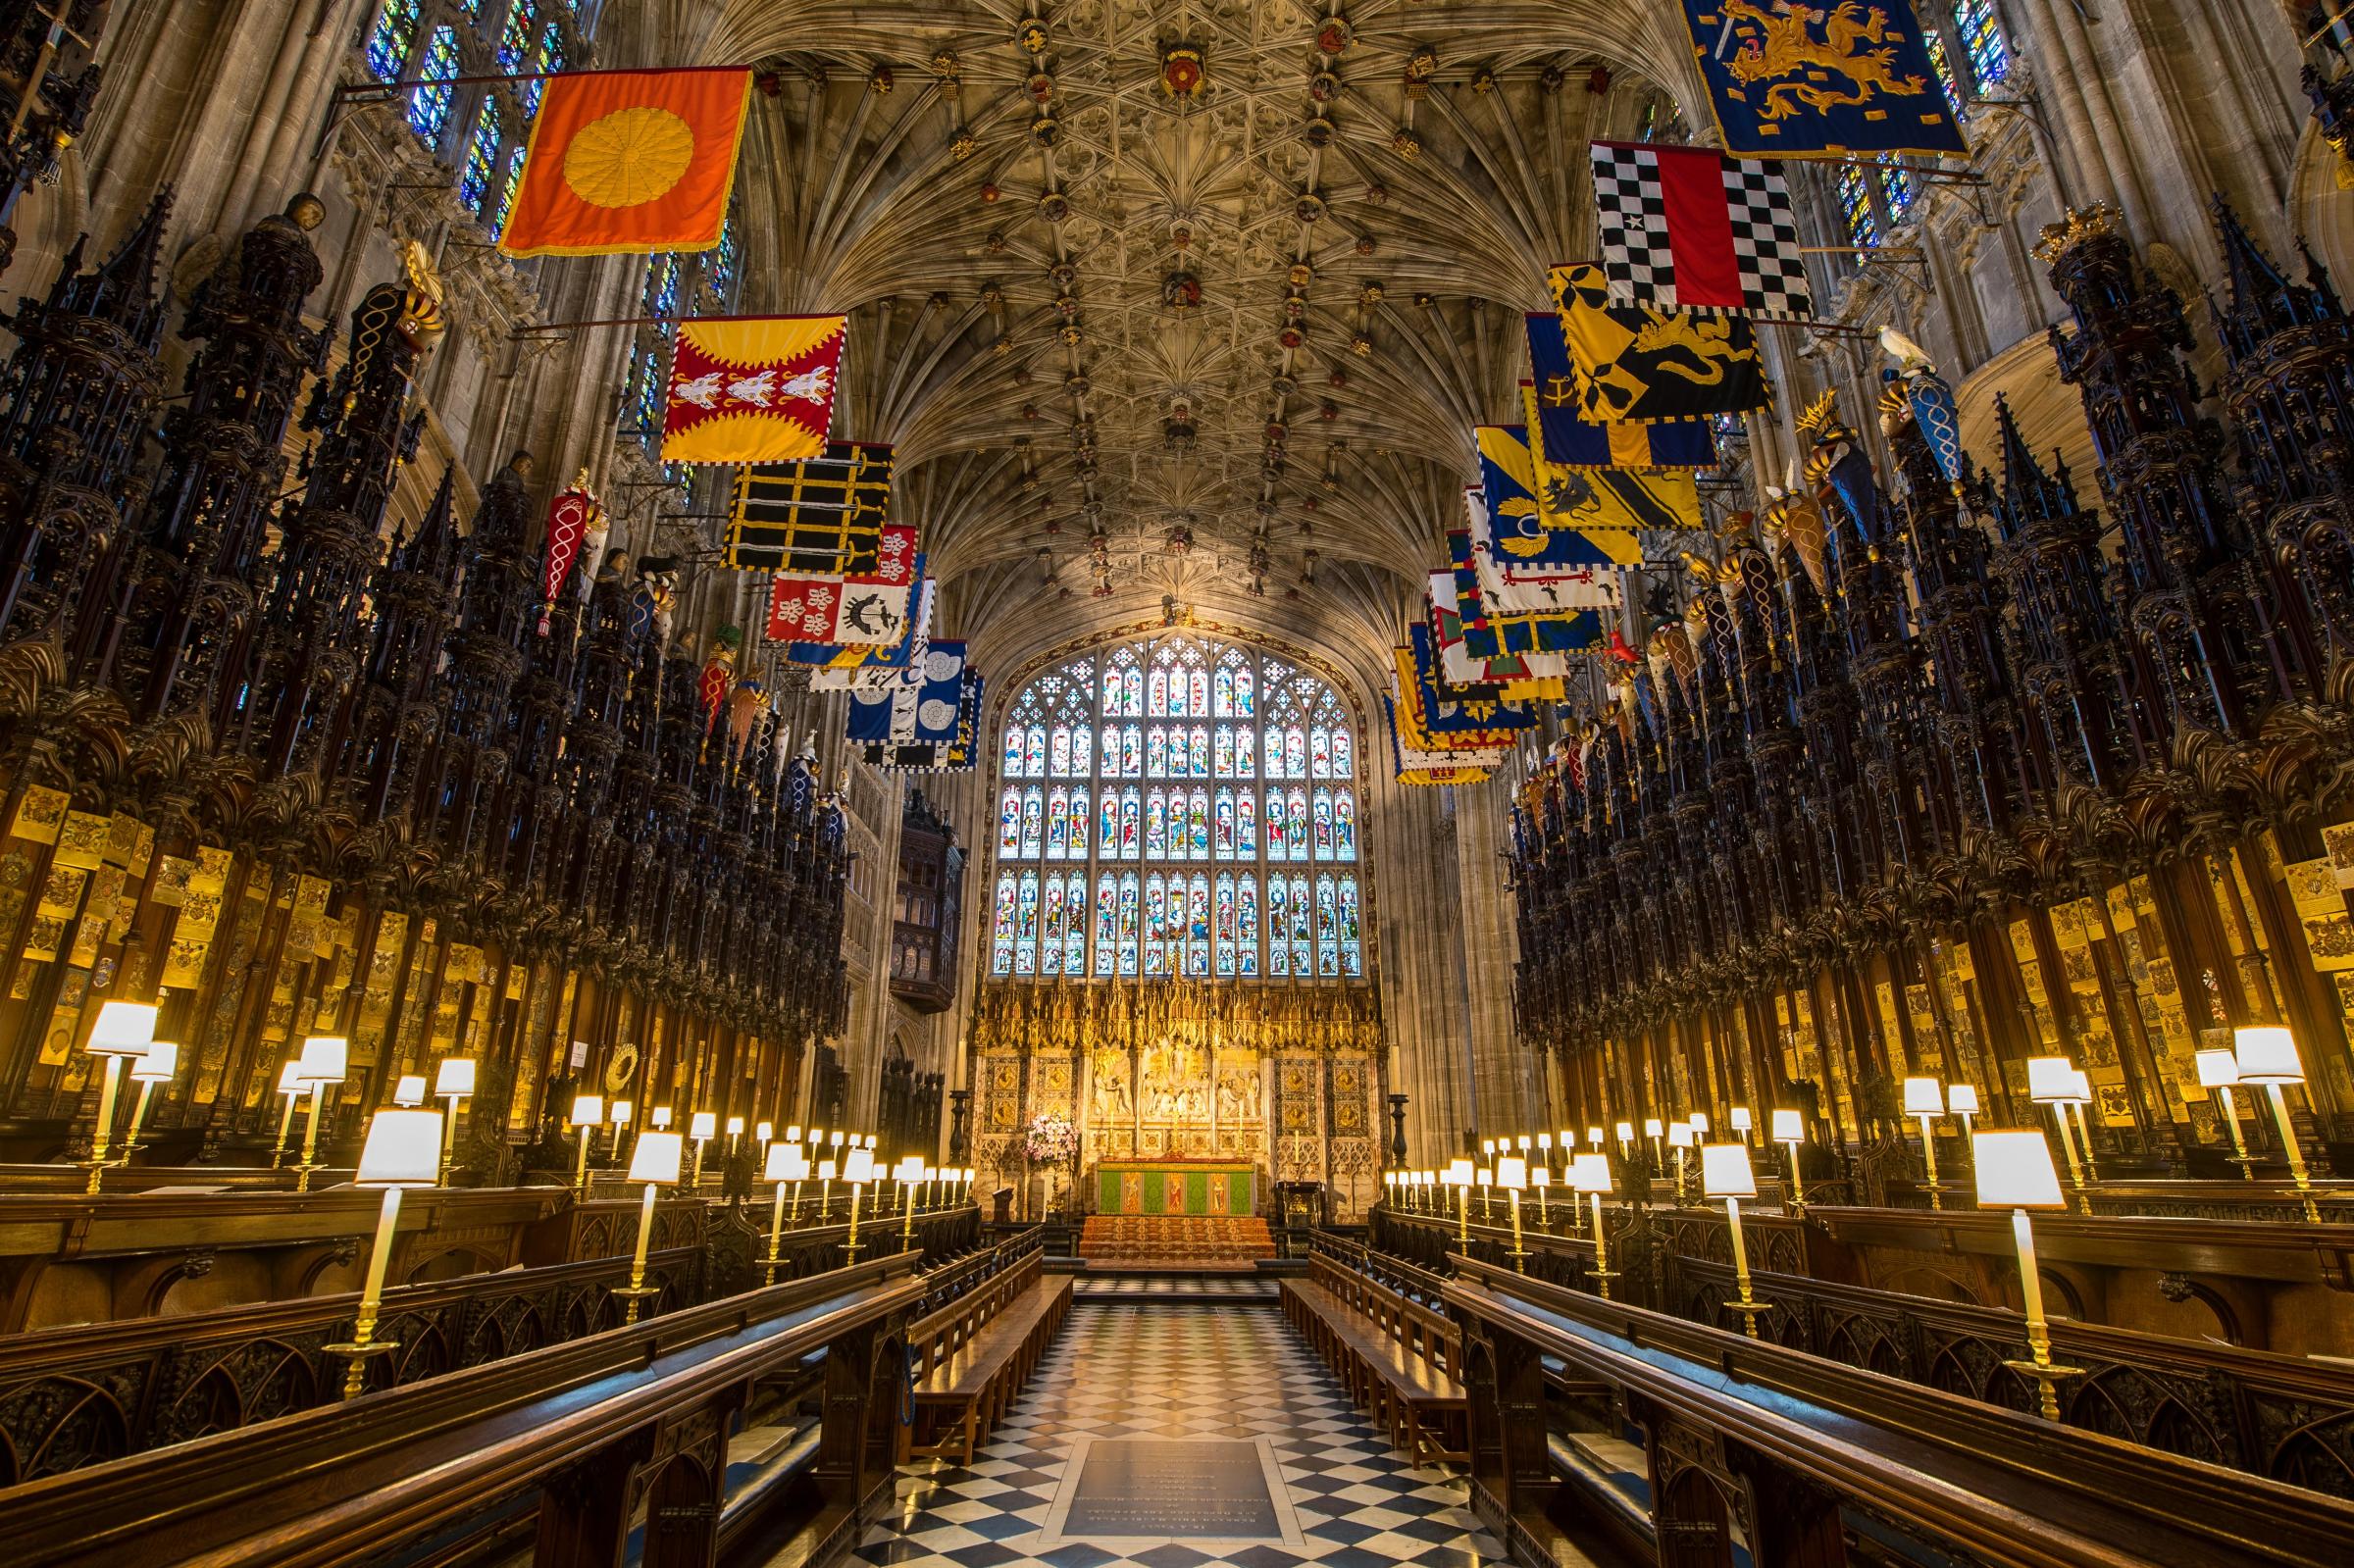 The choir in St. George's Chapel at Windsor Castle